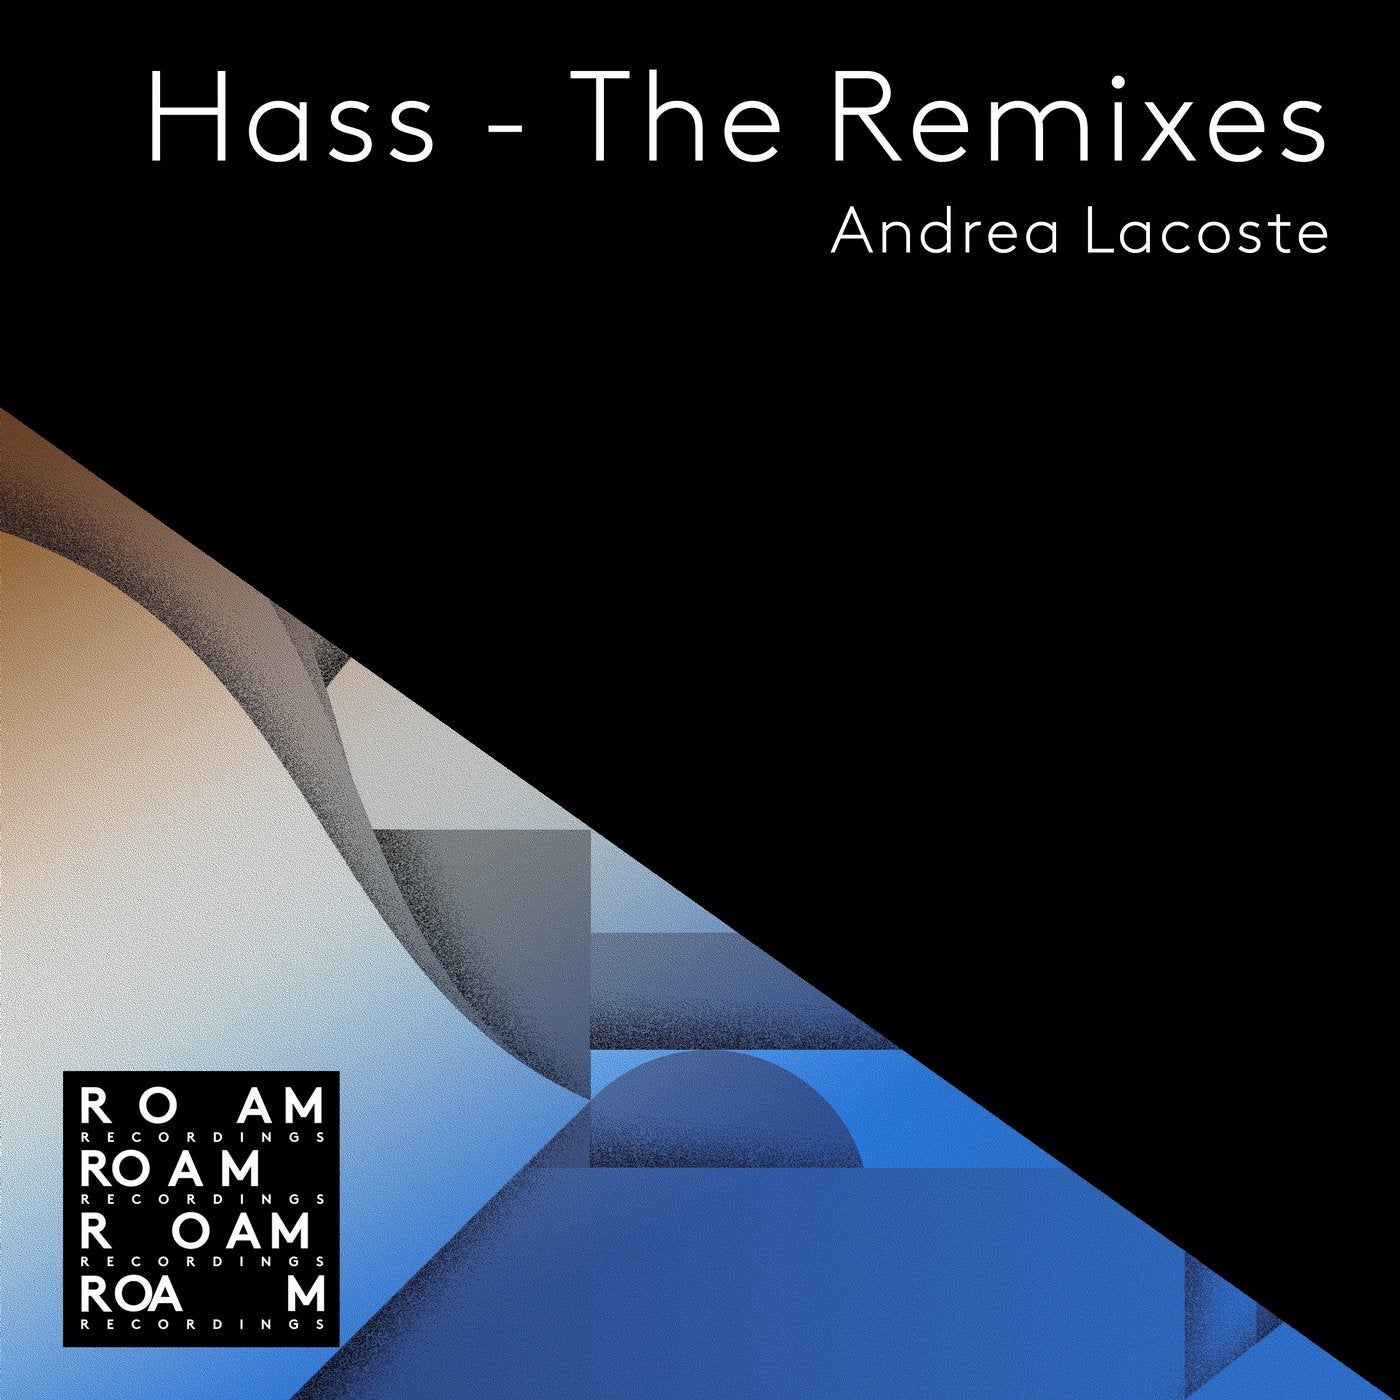 Hass - The Remixes